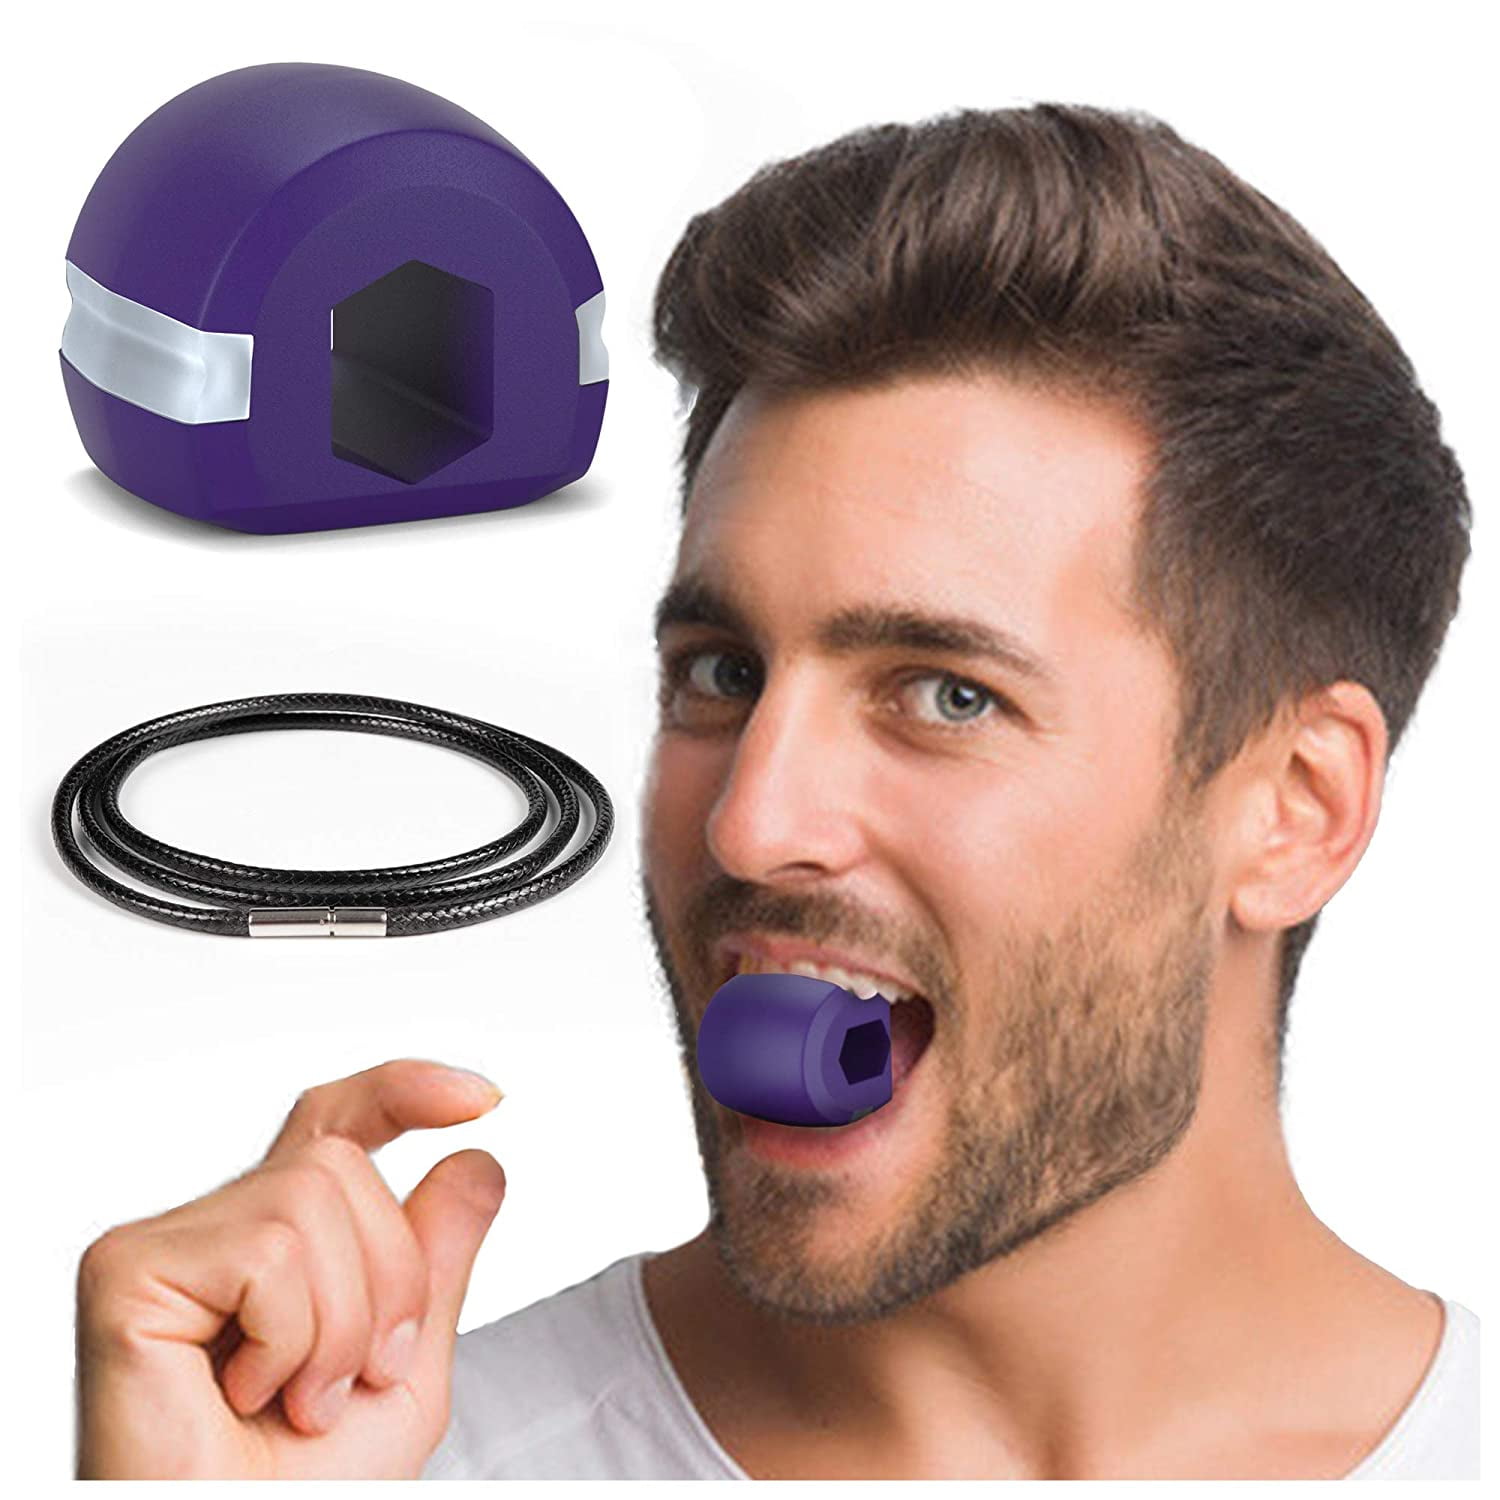 Chew Bite Fitness Ball Jaw Exerciser Chin Slimming Mouth Facial Care Fat-Reducer 